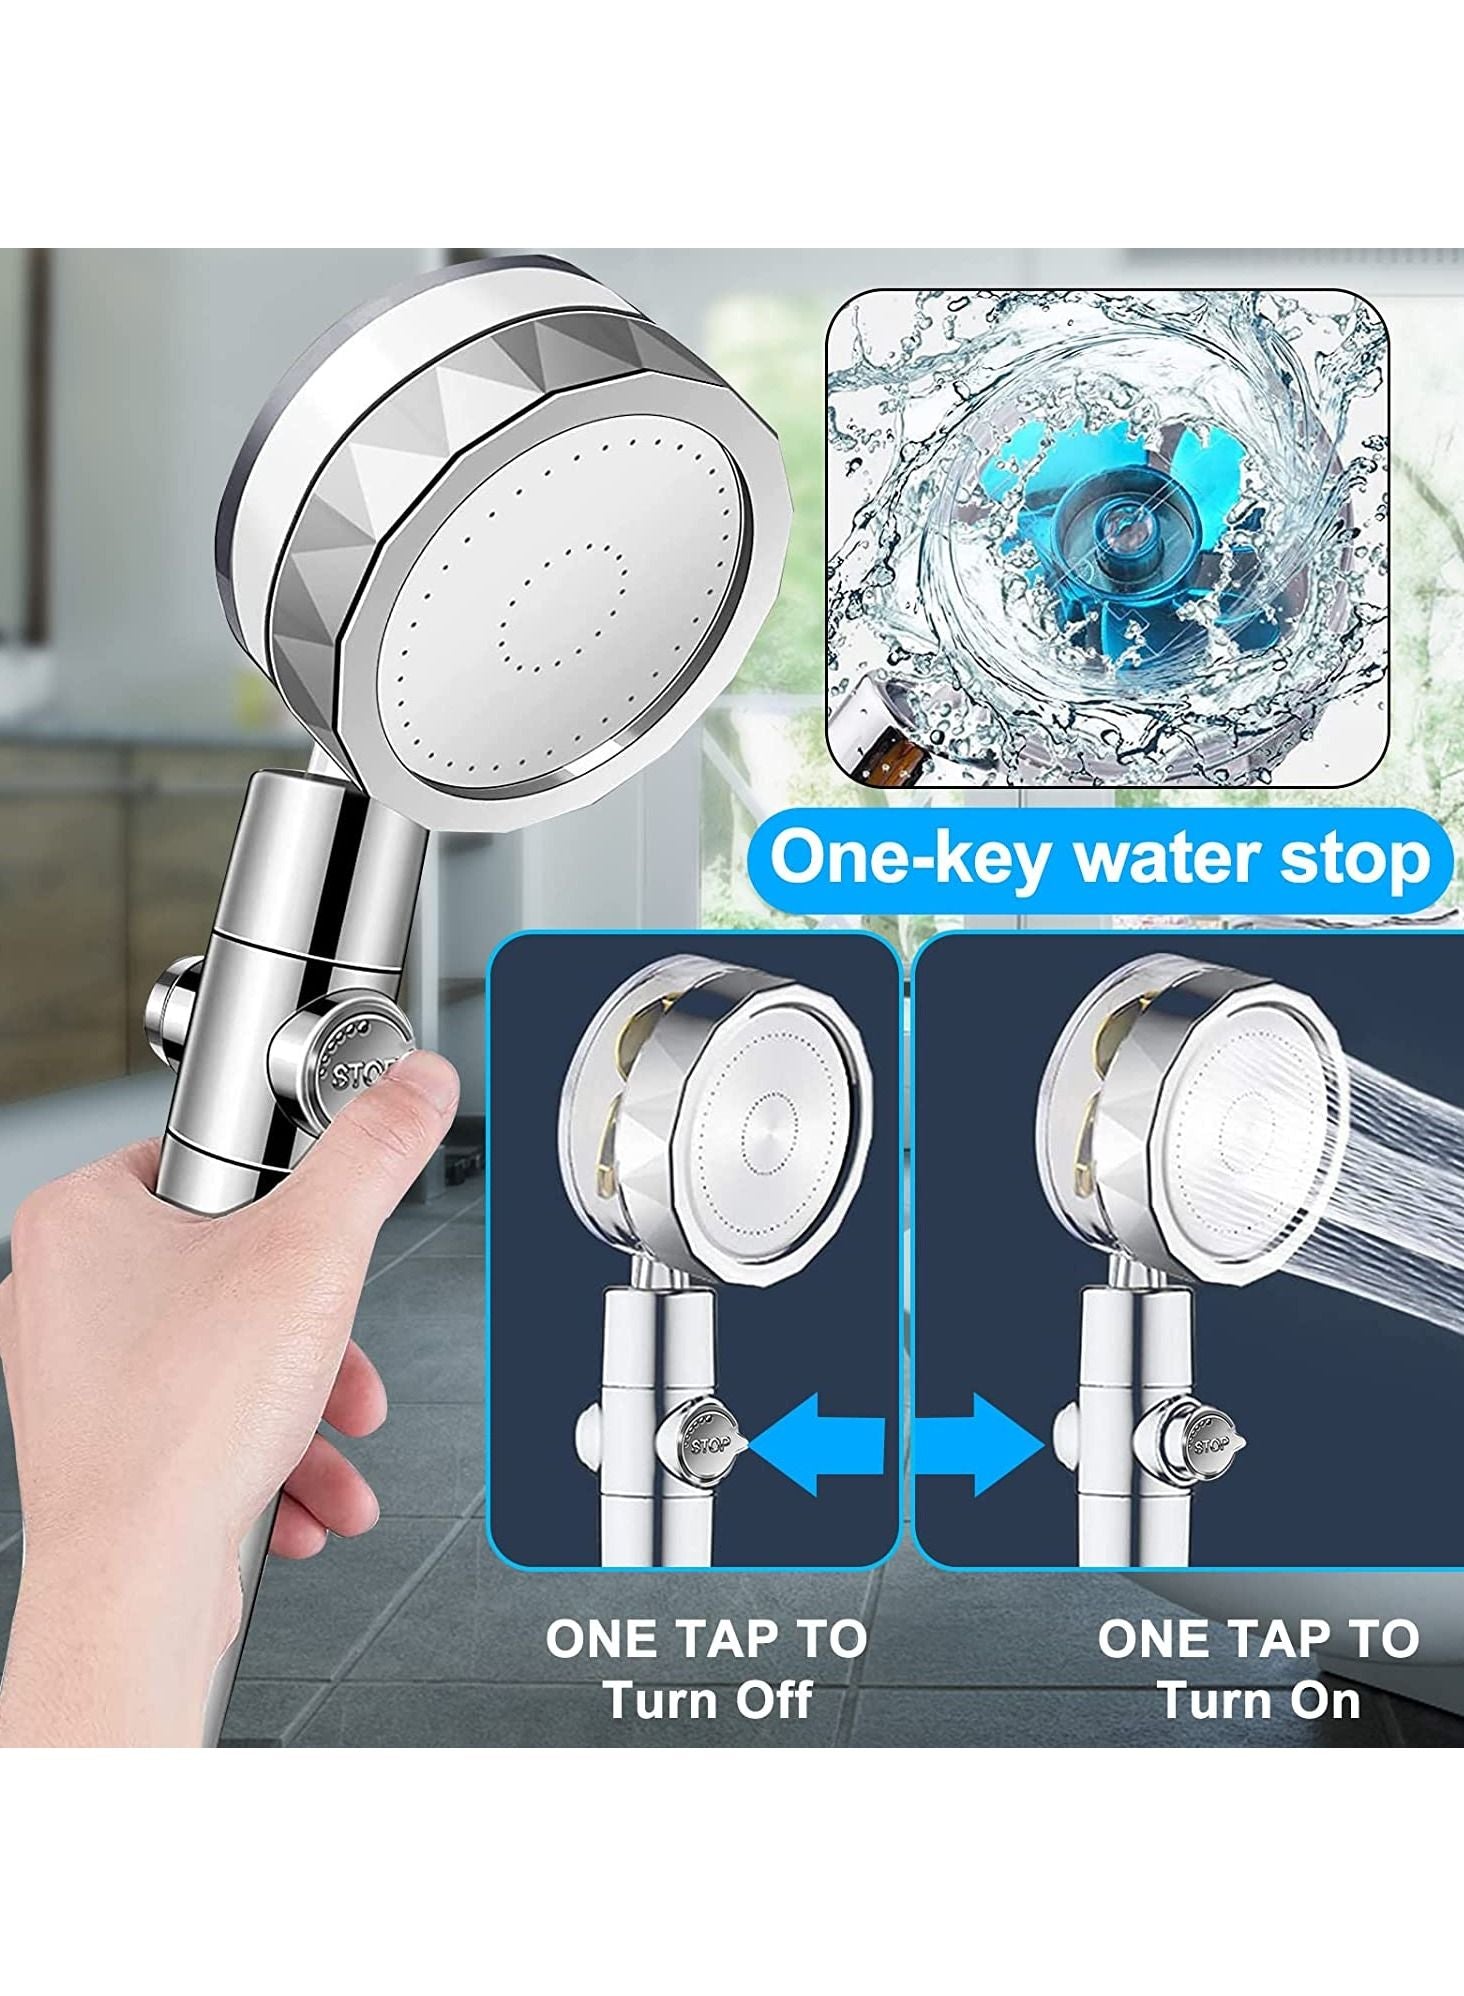 Handheld Shower Head, High Pressure Shower Heads Turbo Fan 360 Degrees Rotating, Hydro Jet Shower Head with 3 Filters Turbocharged Showerhead (Blue)